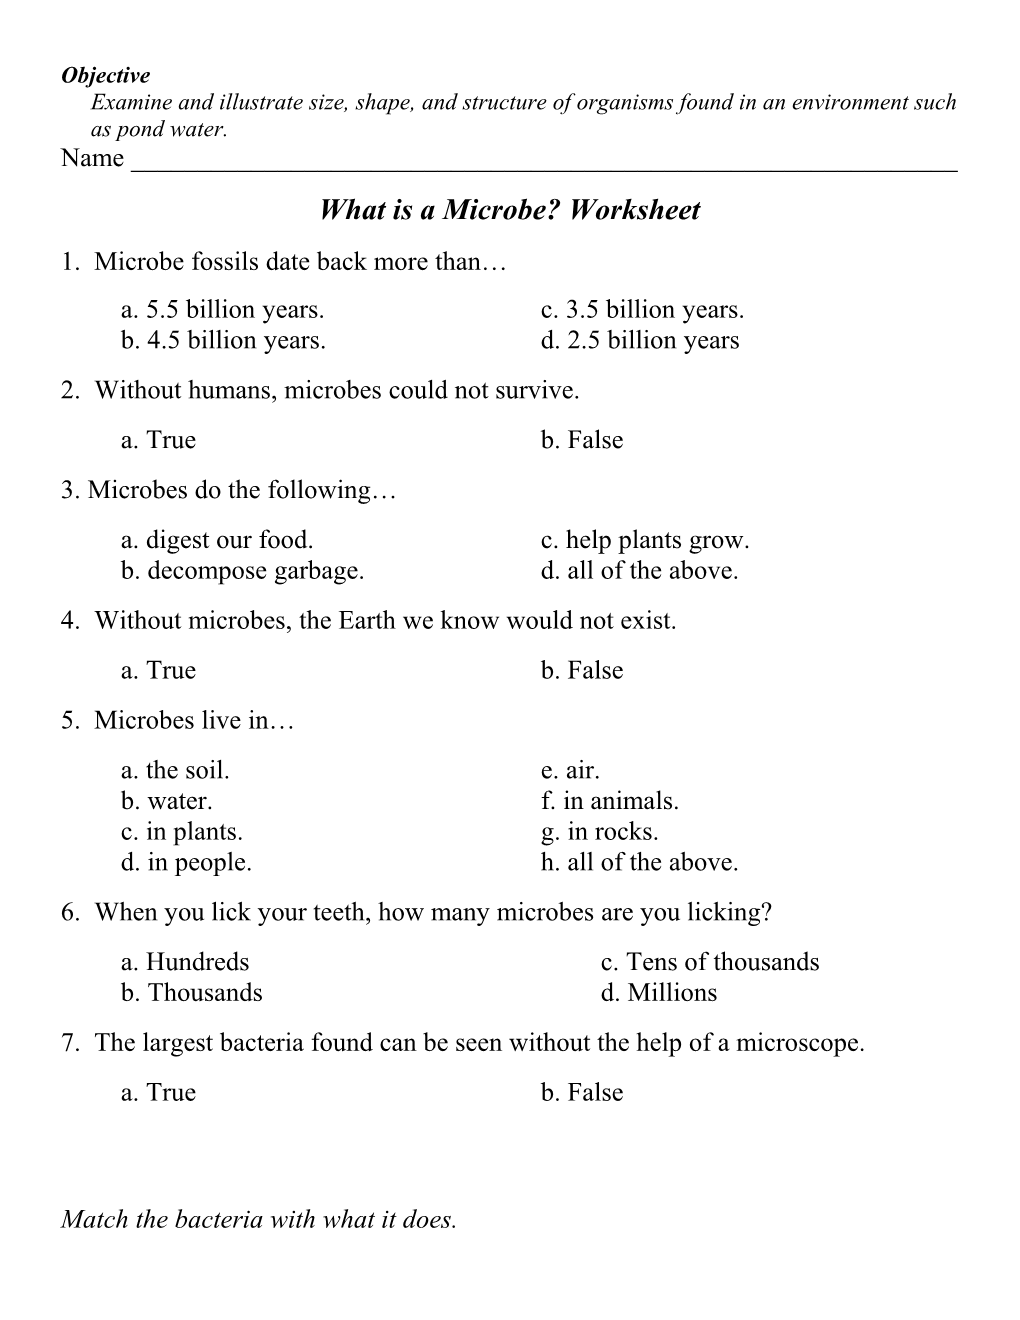 What Is a Microbe? Worksheet